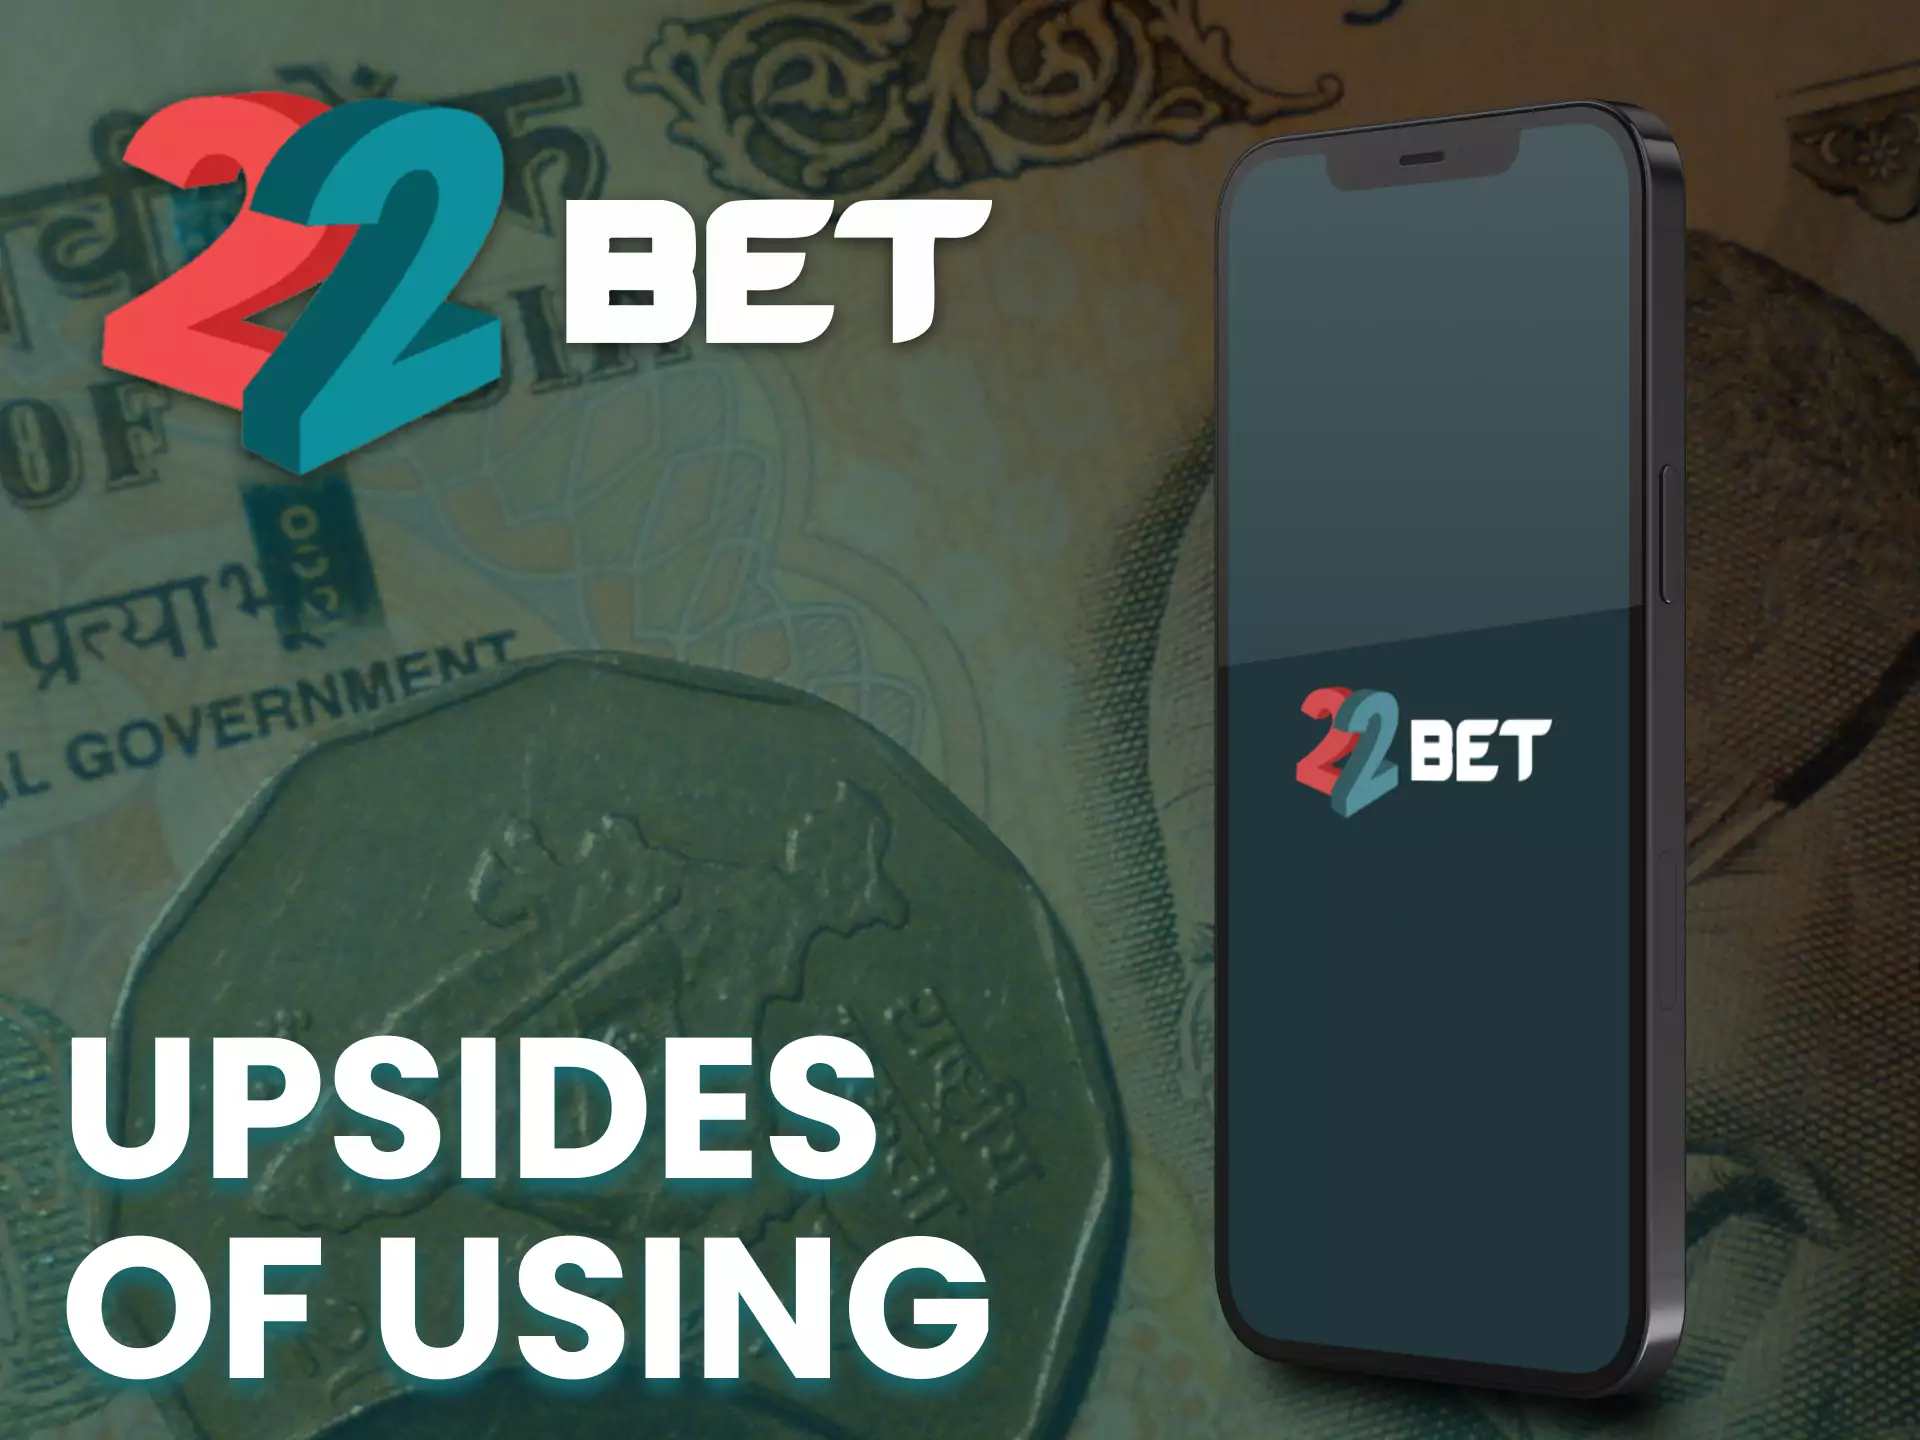 Learn about all the upsides of using 22bet for betting.